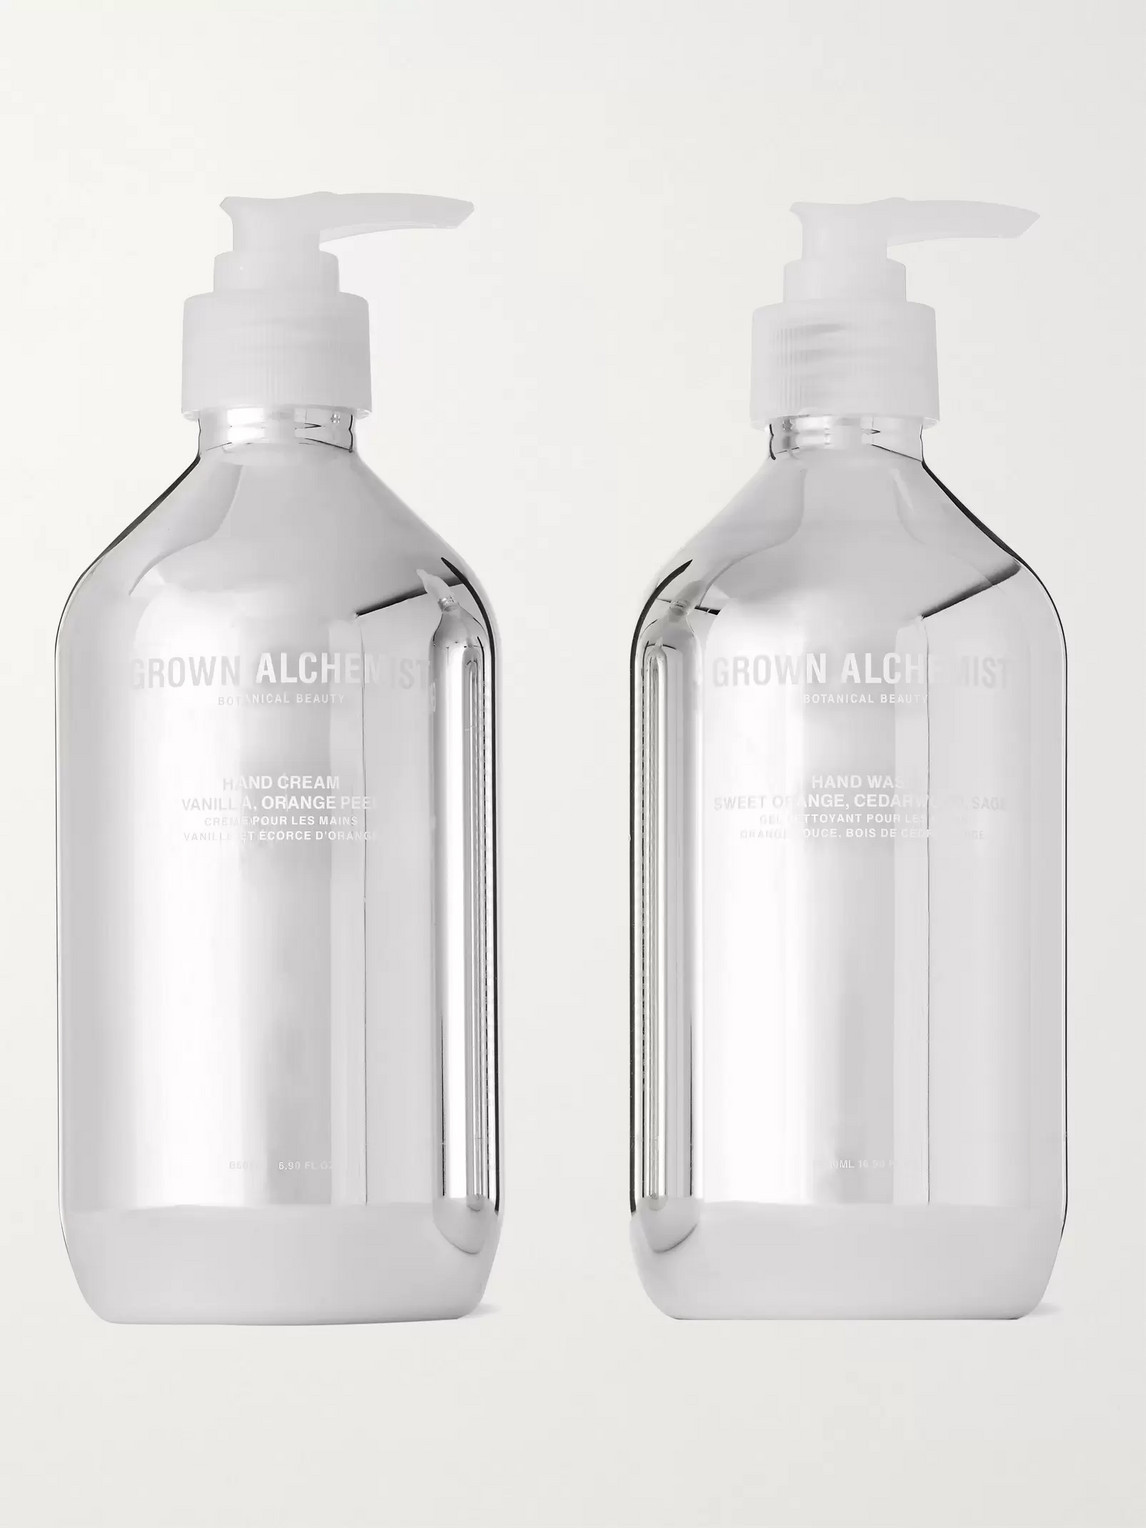 Grown Alchemist Hand Care Kit In Colorless